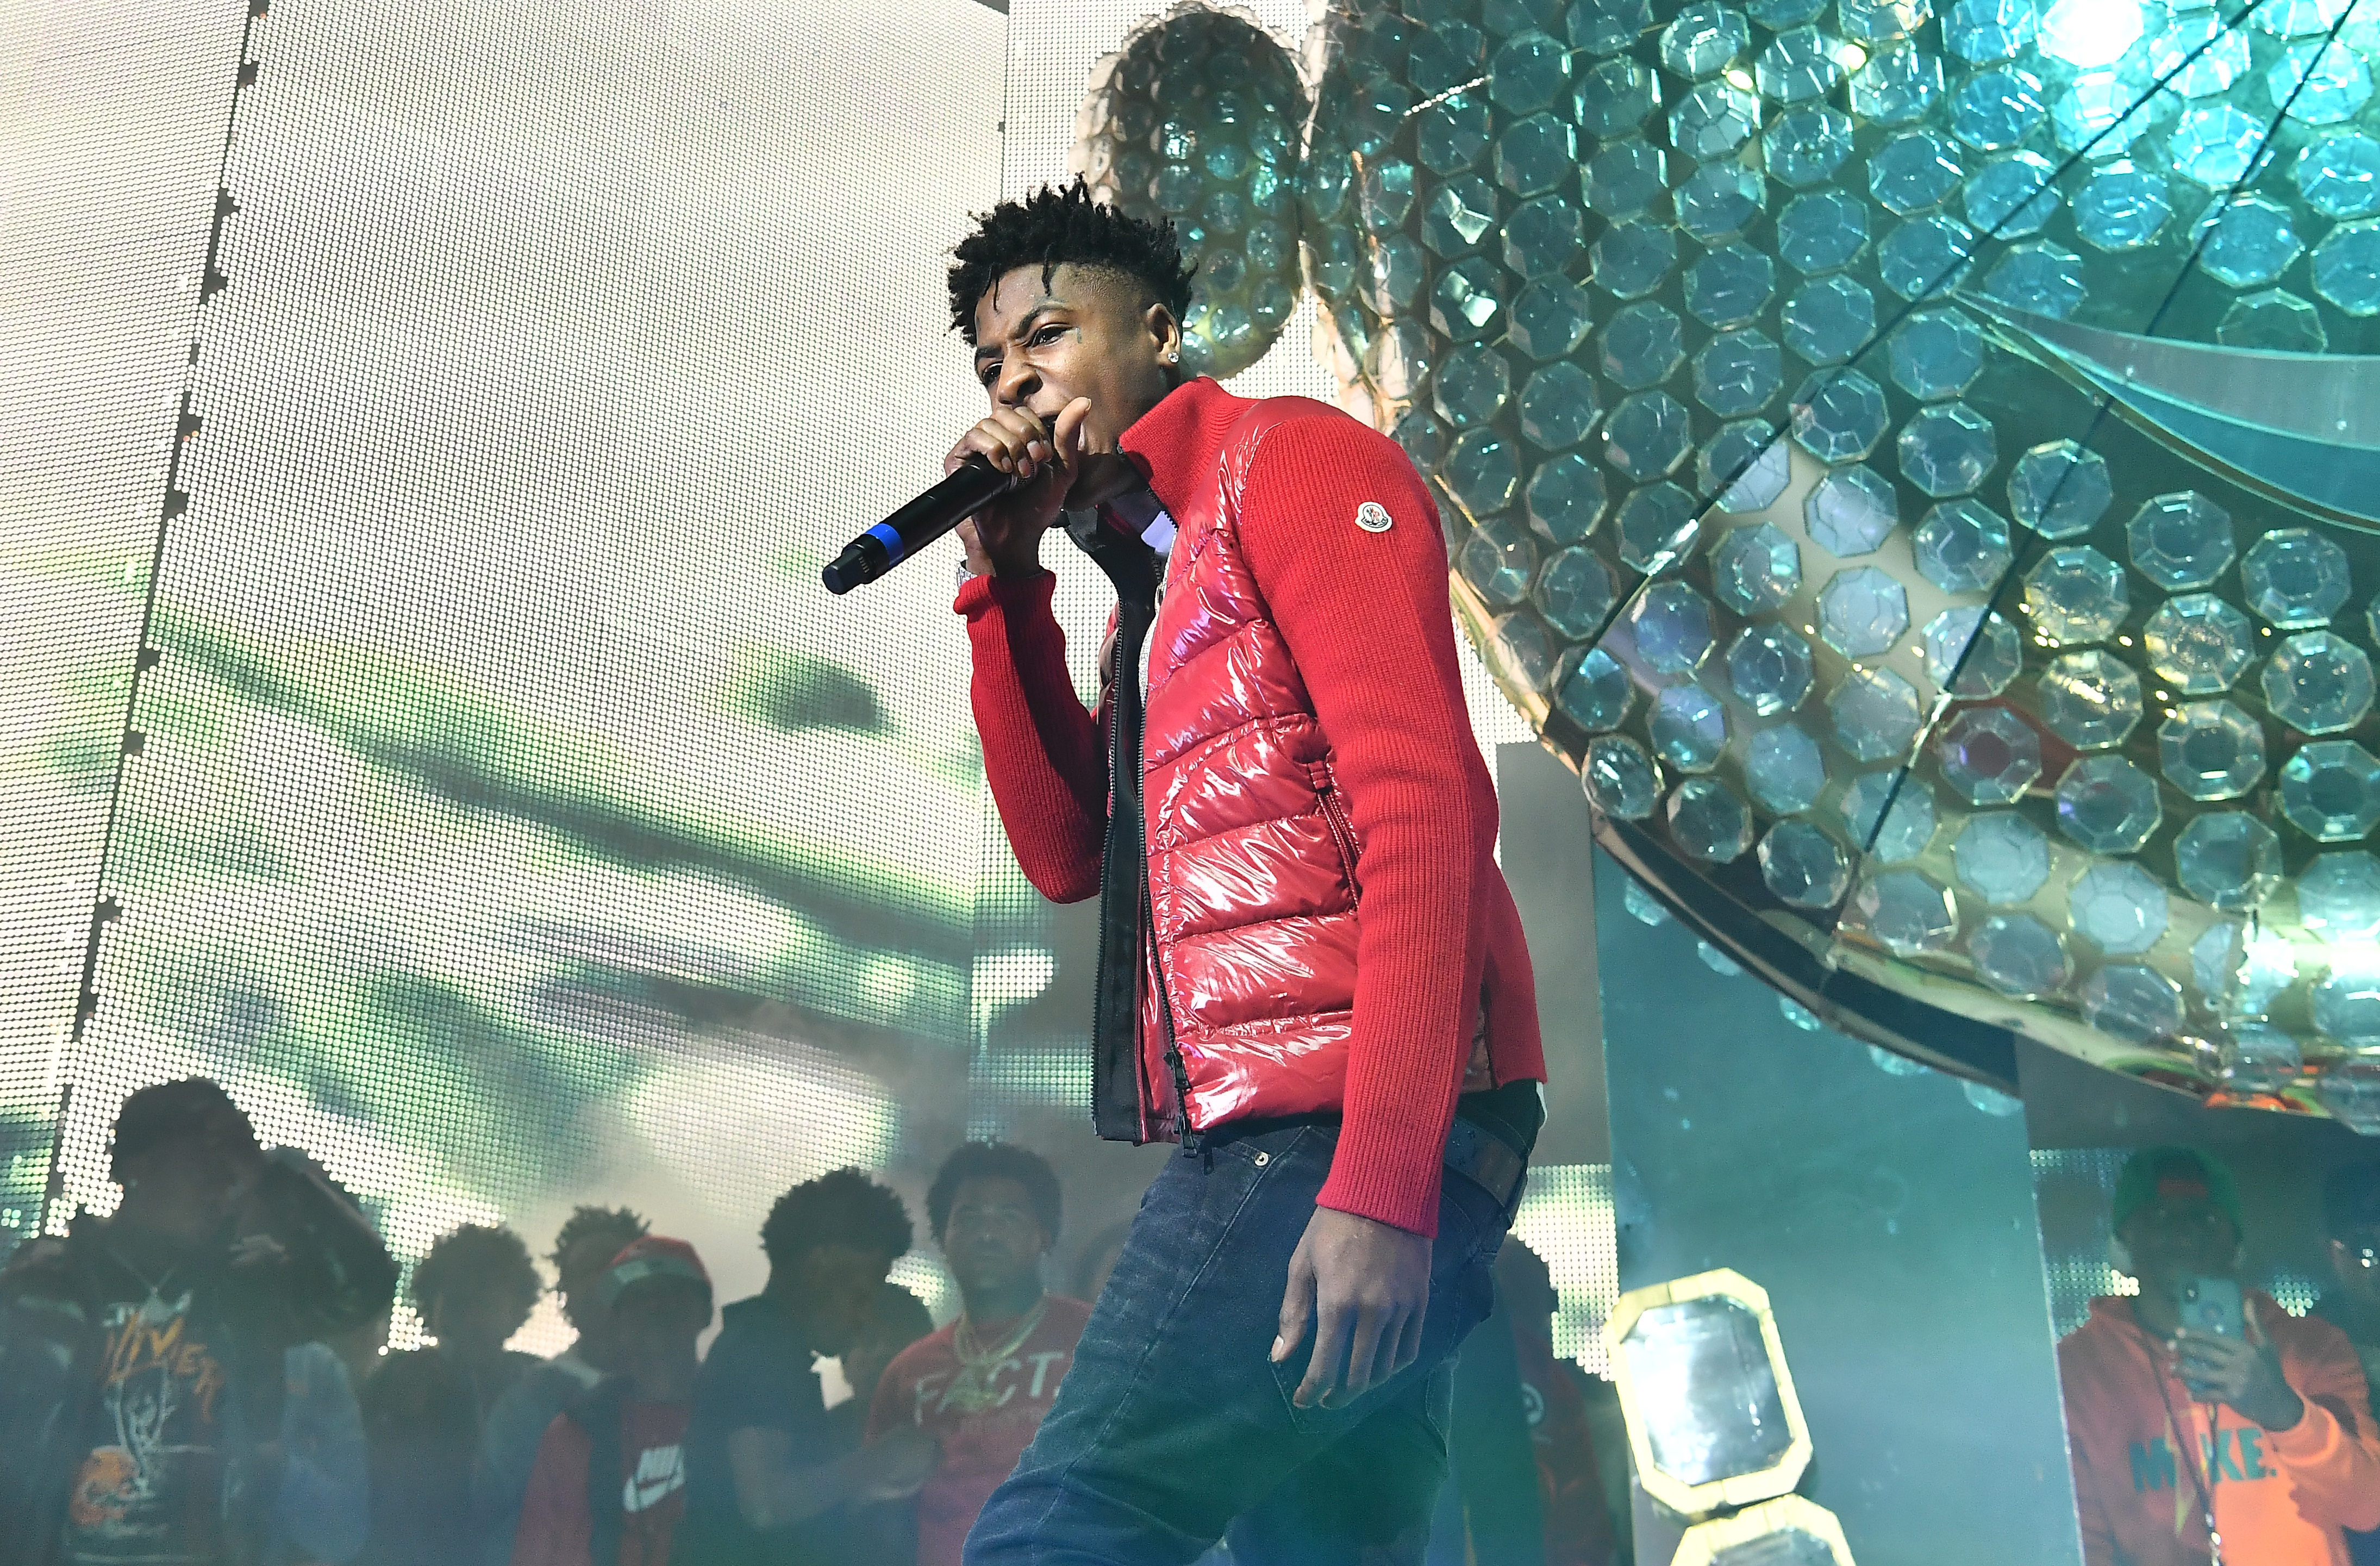 YoungBoy NeverBrokeAgain performs onstage during Lil Baby & Friends concert to promote the new release of Lil Baby's new album "Street Gossip" at Coca-Cola Roxy on November 29, 2018, in Atlanta, Georgia. | Source: Getty Images